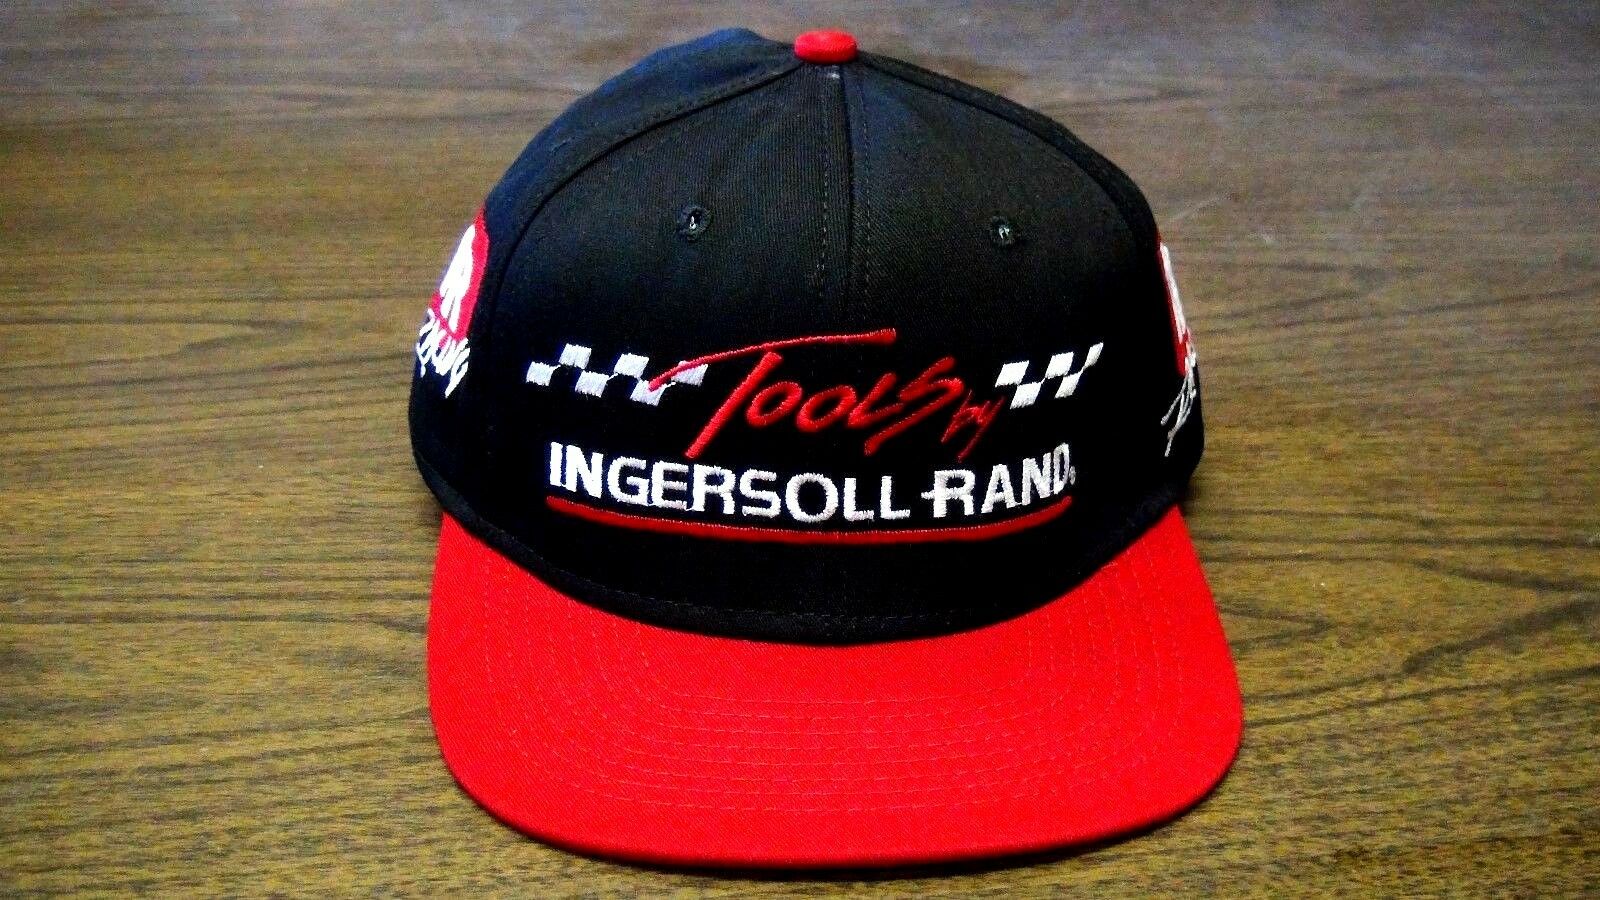 Ingersoll Rand Tools Racing Embroidered Ray Evernham Strapback Hat Cap,USA Made 